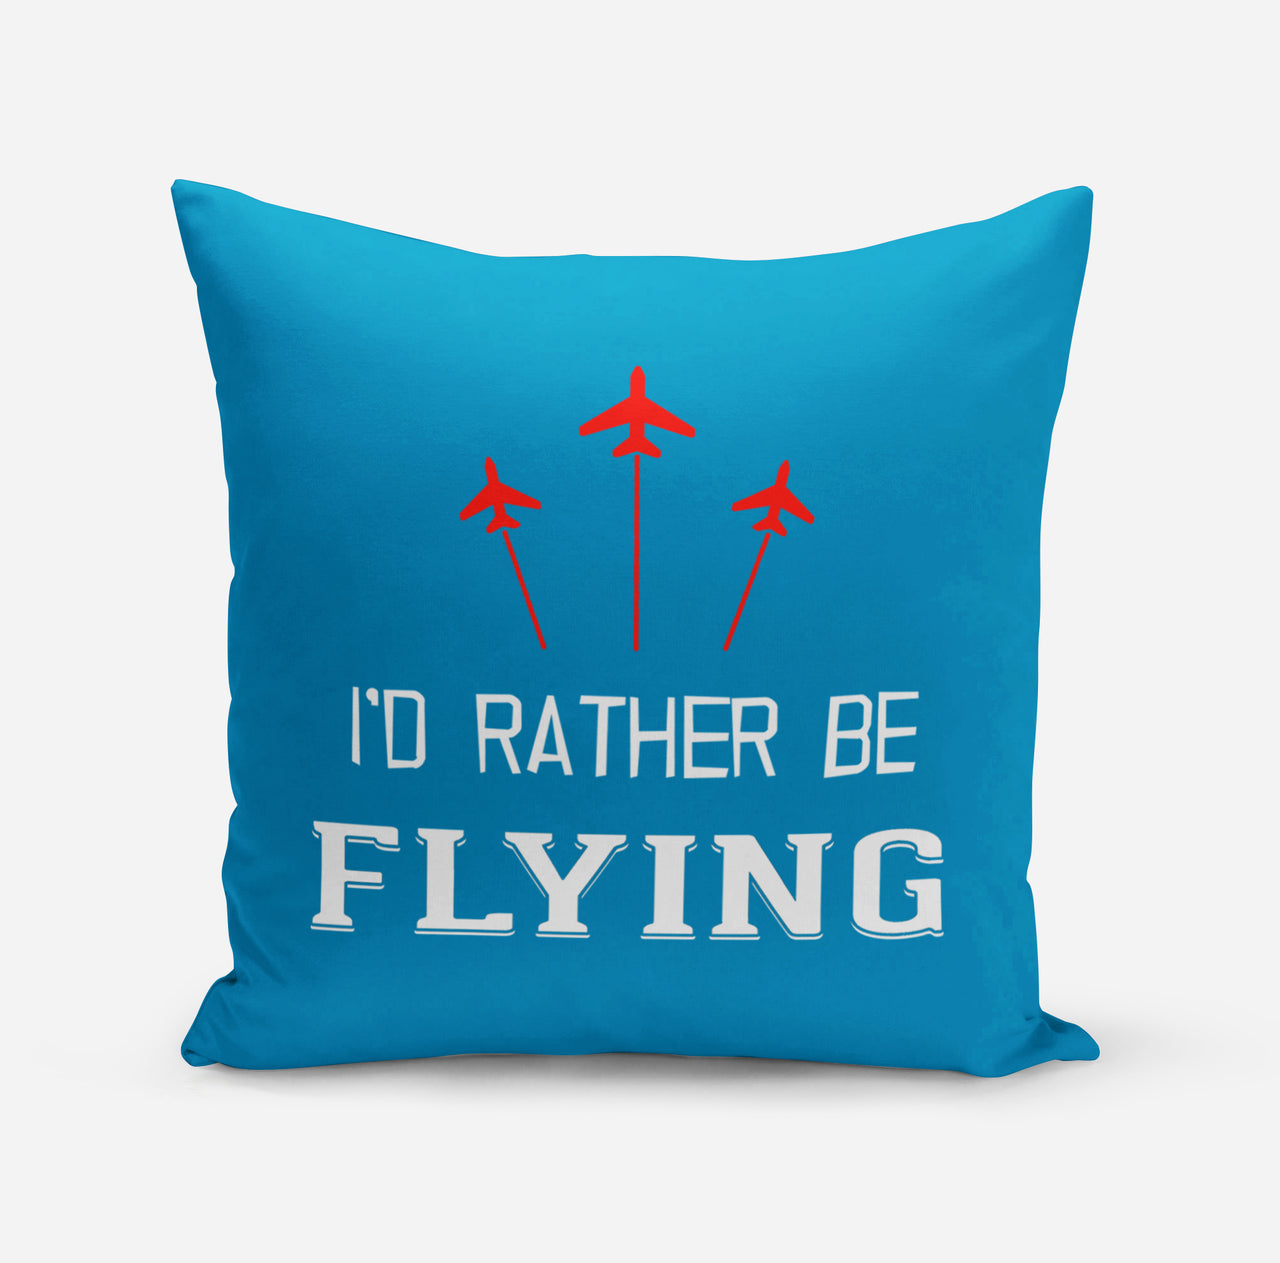 I'D Rather Be Flying Designed Pillows